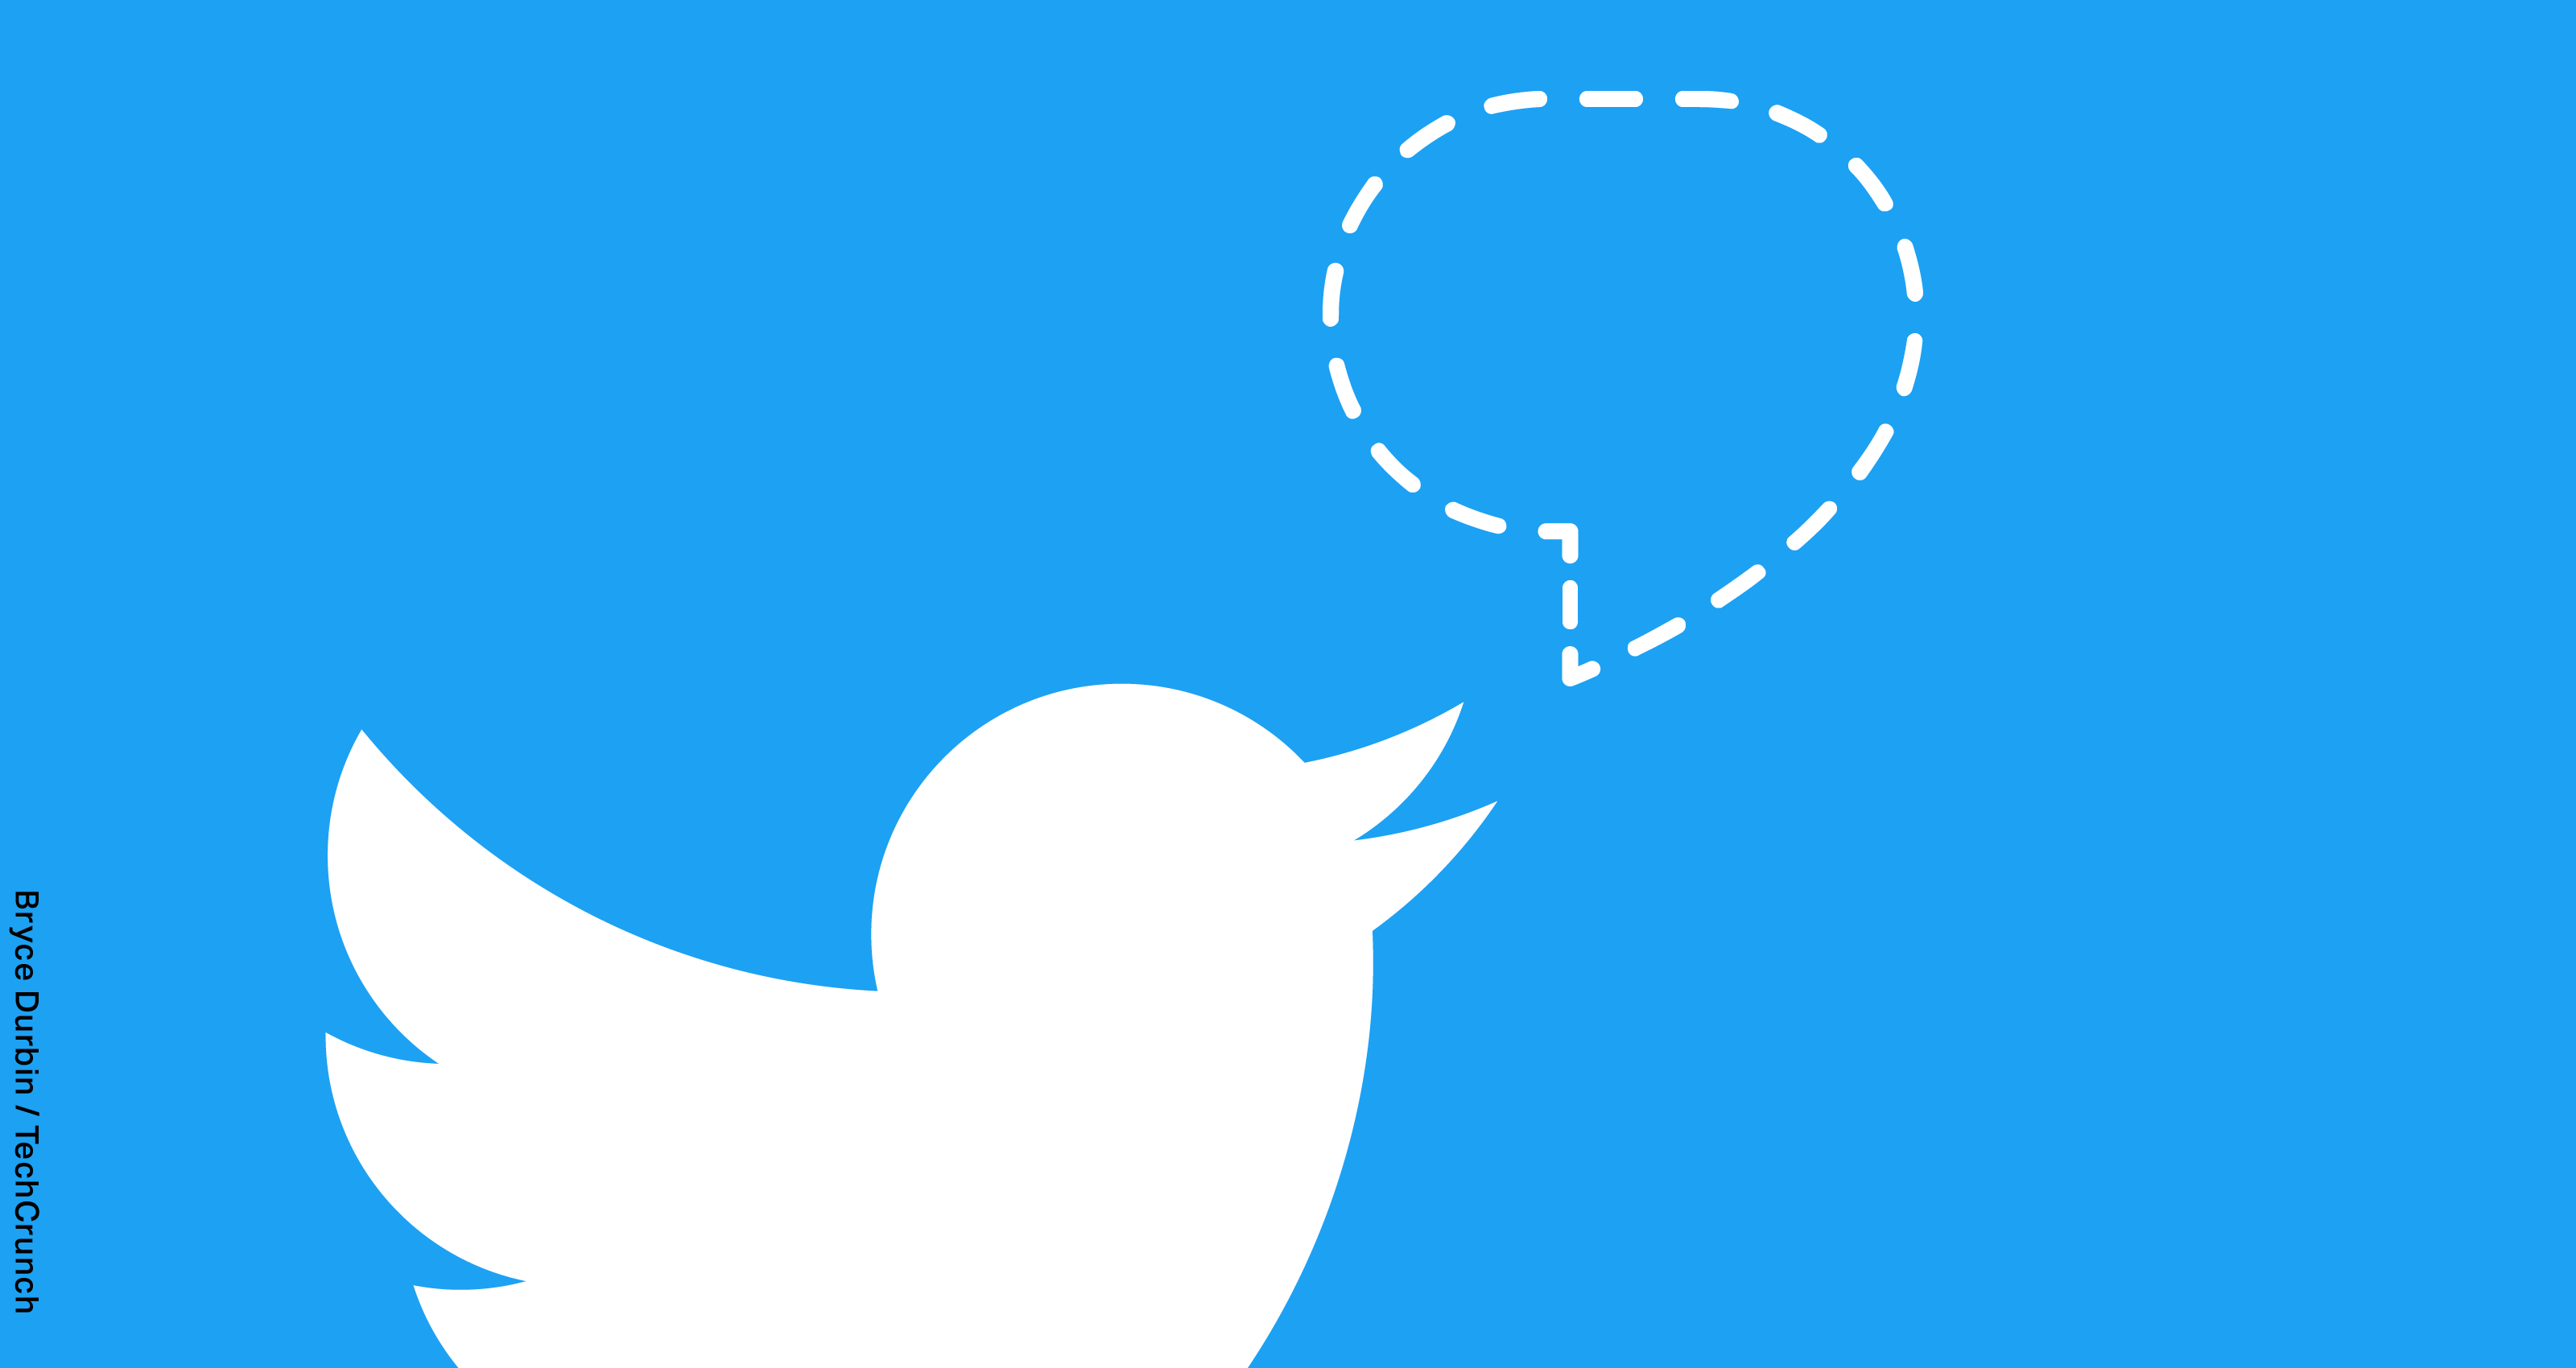 twitter rolls out improved 'reply prompts' to cut down on harmful tweets | techcrunch